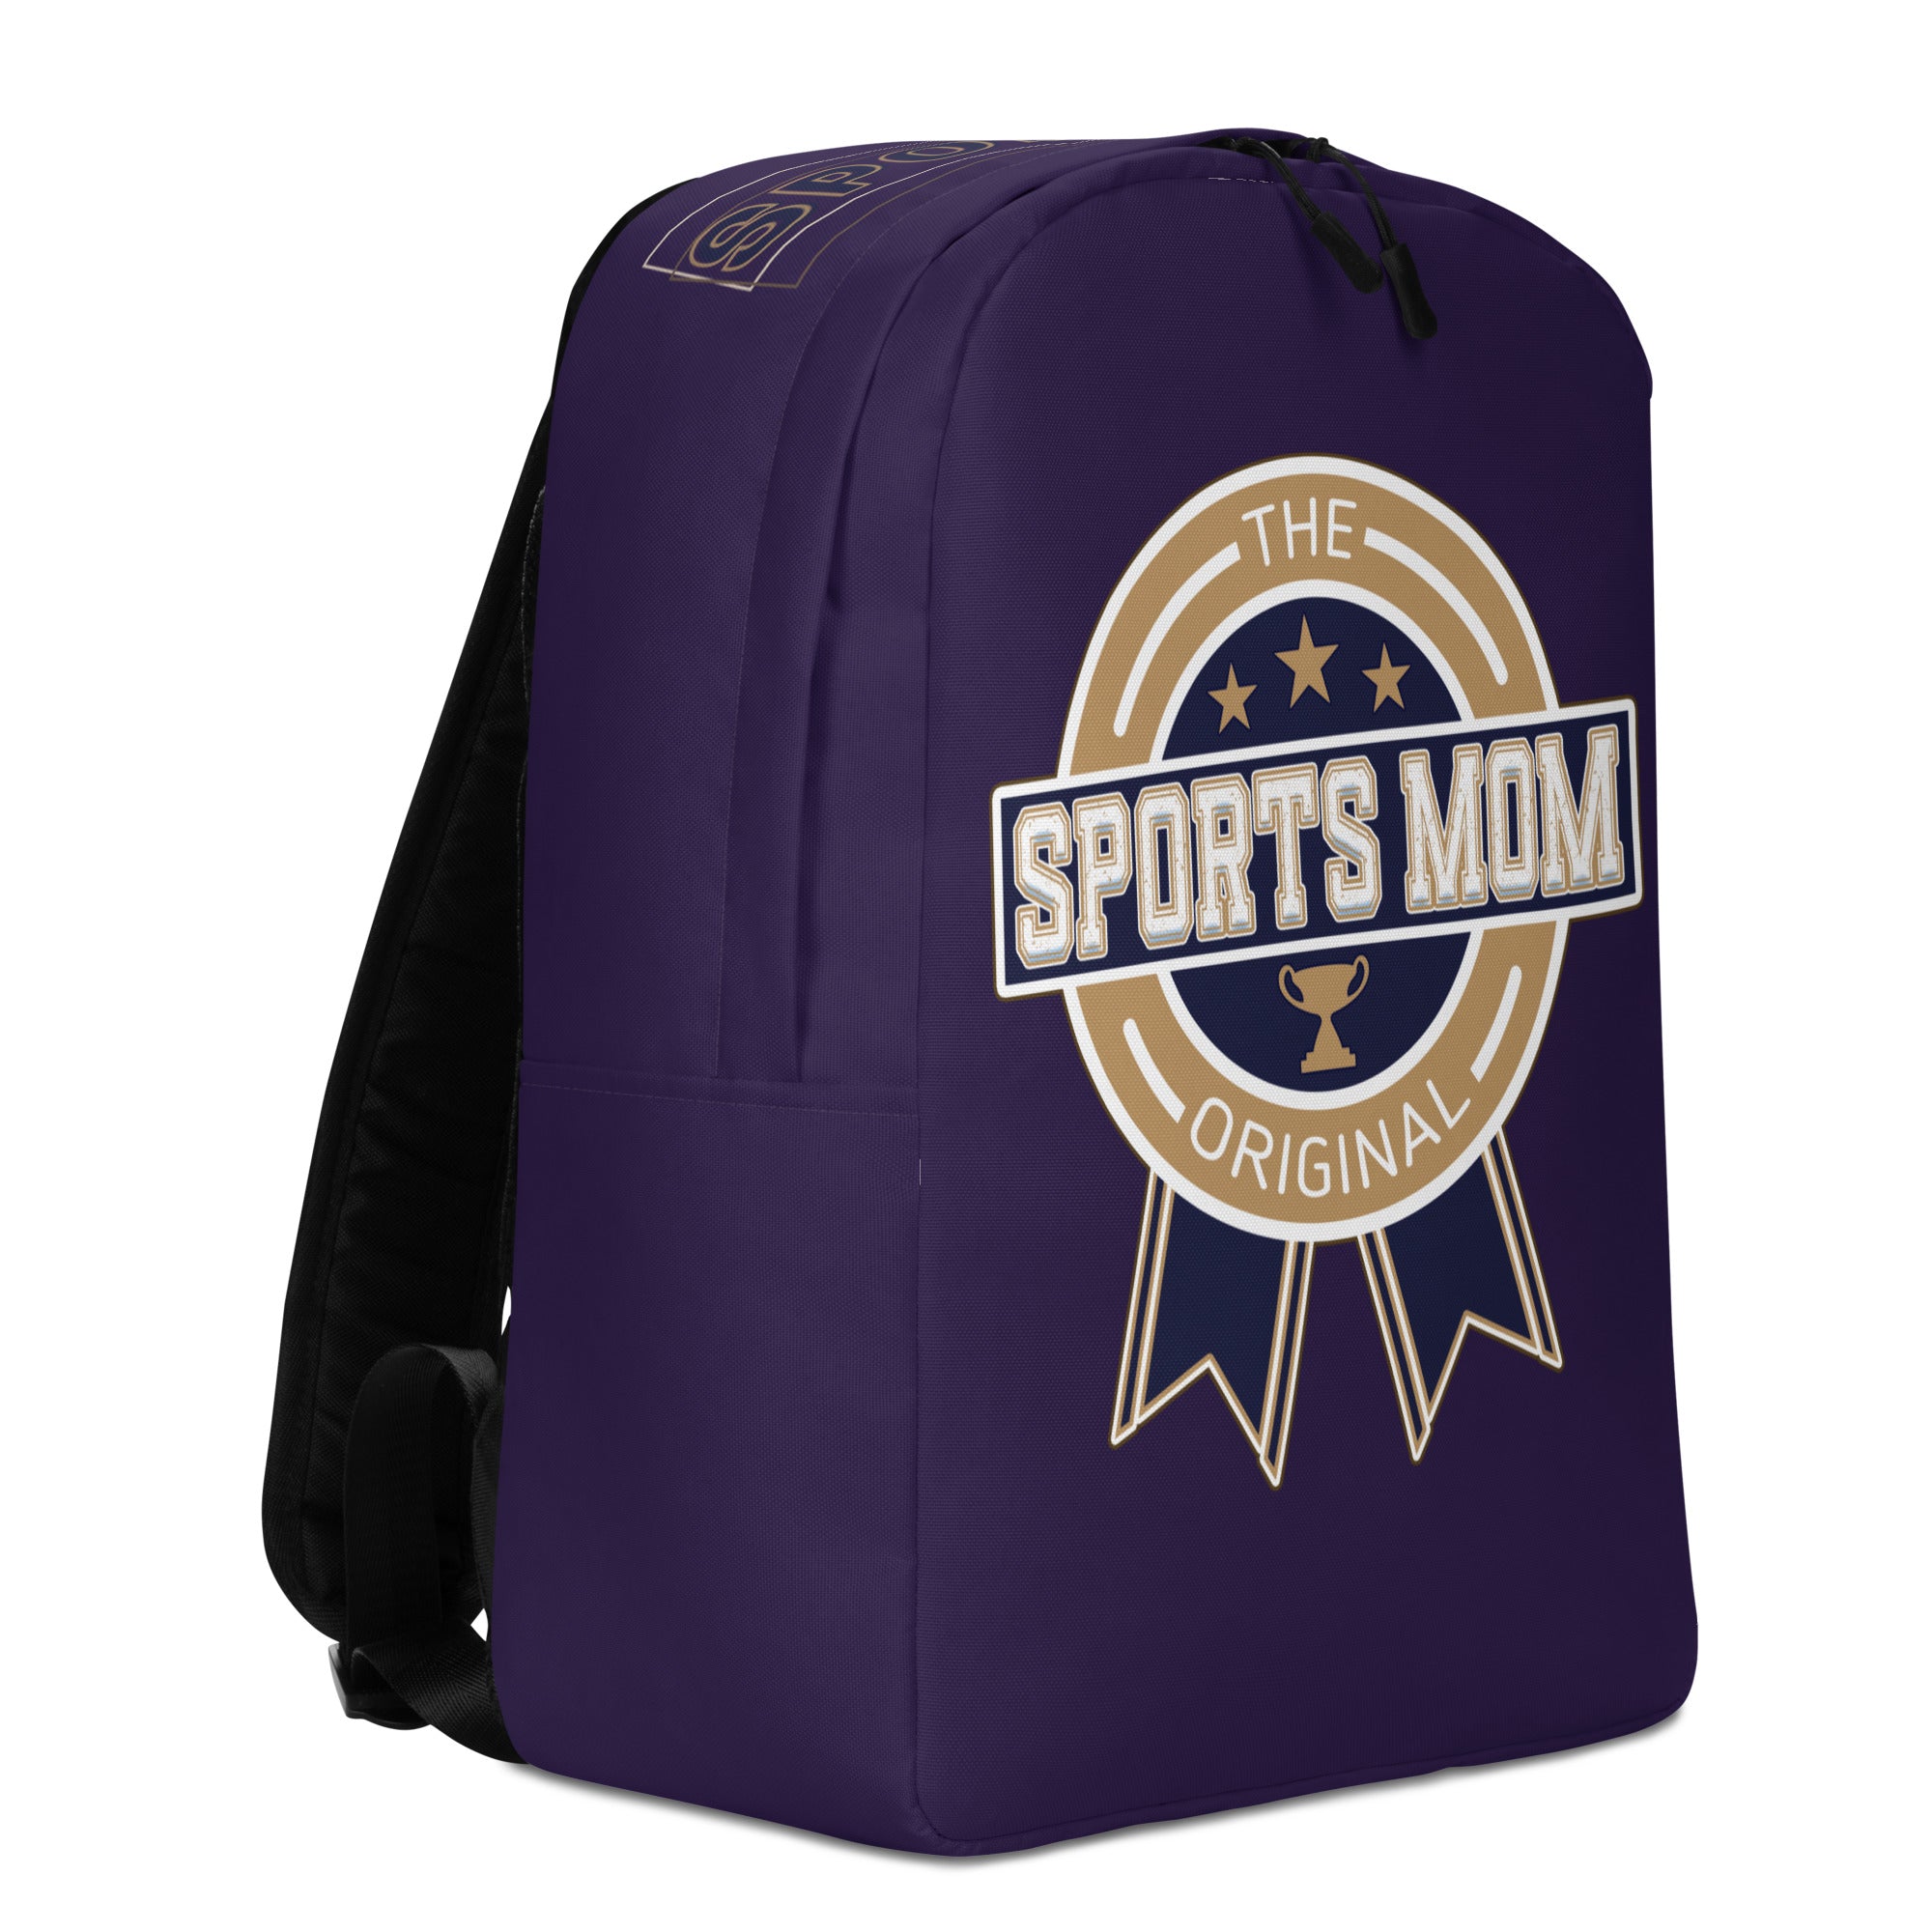 Sports Mom Minimalist Backpack - Away Game - Tolopea